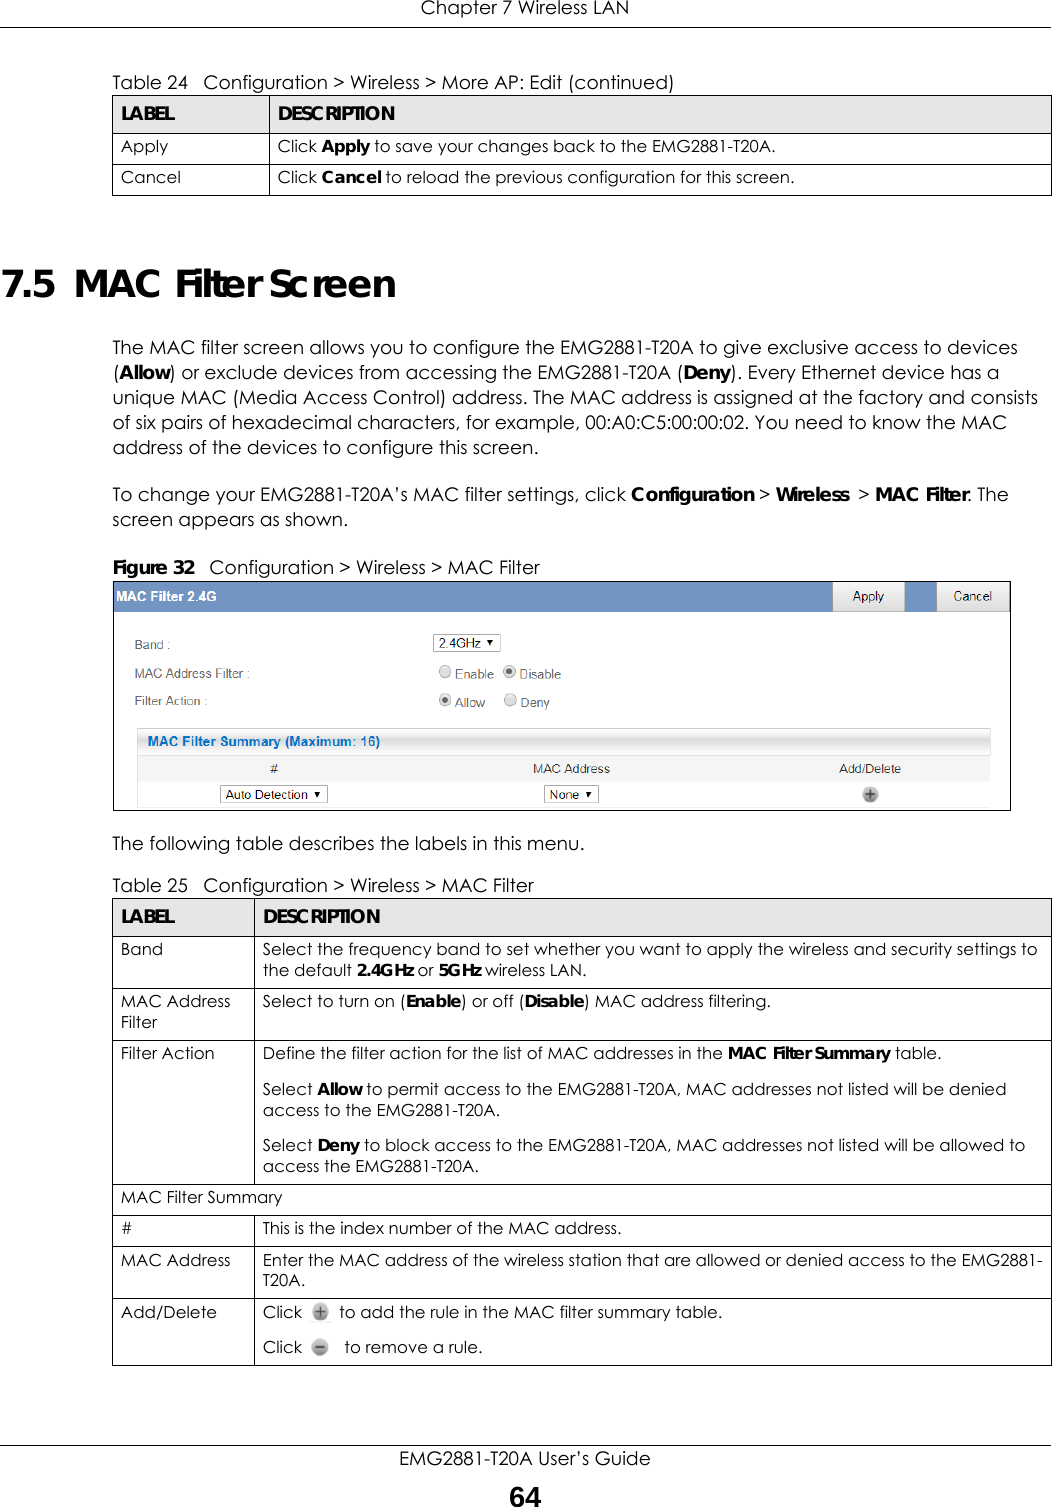 Chapter 7 Wireless LANEMG2881-T20A User’s Guide647.5  MAC Filter Screen The MAC filter screen allows you to configure the EMG2881-T20A to give exclusive access to devices (Allow) or exclude devices from accessing the EMG2881-T20A (Deny). Every Ethernet device has a unique MAC (Media Access Control) address. The MAC address is assigned at the factory and consists of six pairs of hexadecimal characters, for example, 00:A0:C5:00:00:02. You need to know the MAC address of the devices to configure this screen.To change your EMG2881-T20A’s MAC filter settings, click Configuration &gt; Wireless  &gt; MAC Filter. The screen appears as shown.Figure 32   Configuration &gt; Wireless &gt; MAC FilterThe following table describes the labels in this menu.Apply Click Apply to save your changes back to the EMG2881-T20A.Cancel Click Cancel to reload the previous configuration for this screen.Table 24   Configuration &gt; Wireless &gt; More AP: Edit (continued)LABEL DESCRIPTIONTable 25   Configuration &gt; Wireless &gt; MAC FilterLABEL DESCRIPTIONBand Select the frequency band to set whether you want to apply the wireless and security settings to the default 2.4GHz or 5GHz wireless LAN. MAC Address FilterSelect to turn on (Enable) or off (Disable) MAC address filtering.Filter Action Define the filter action for the list of MAC addresses in the MAC Filter Summary table.Select Allow to permit access to the EMG2881-T20A, MAC addresses not listed will be denied access to the EMG2881-T20A. Select Deny to block access to the EMG2881-T20A, MAC addresses not listed will be allowed to access the EMG2881-T20A. MAC Filter Summary#This is the index number of the MAC address.MAC Address Enter the MAC address of the wireless station that are allowed or denied access to the EMG2881-T20A.Add/Delete Click   to add the rule in the MAC filter summary table.Click   to remove a rule.